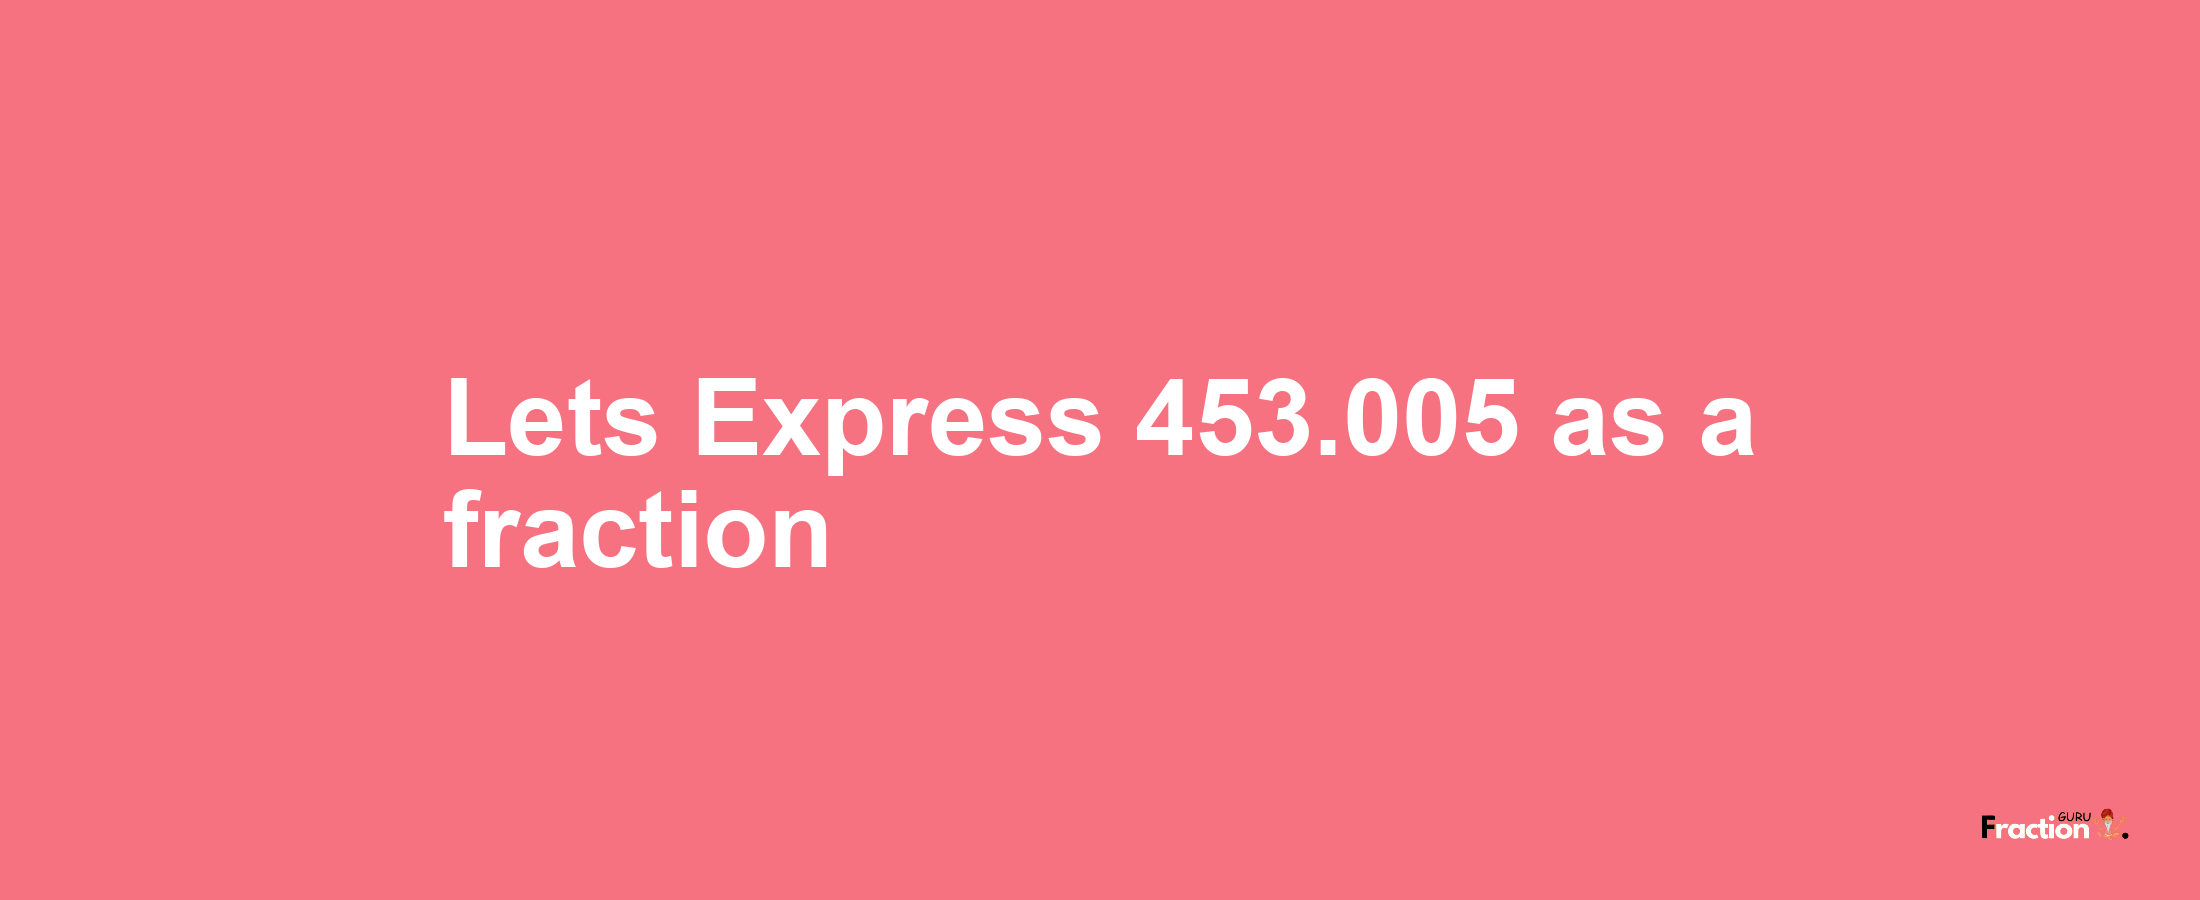 Lets Express 453.005 as afraction